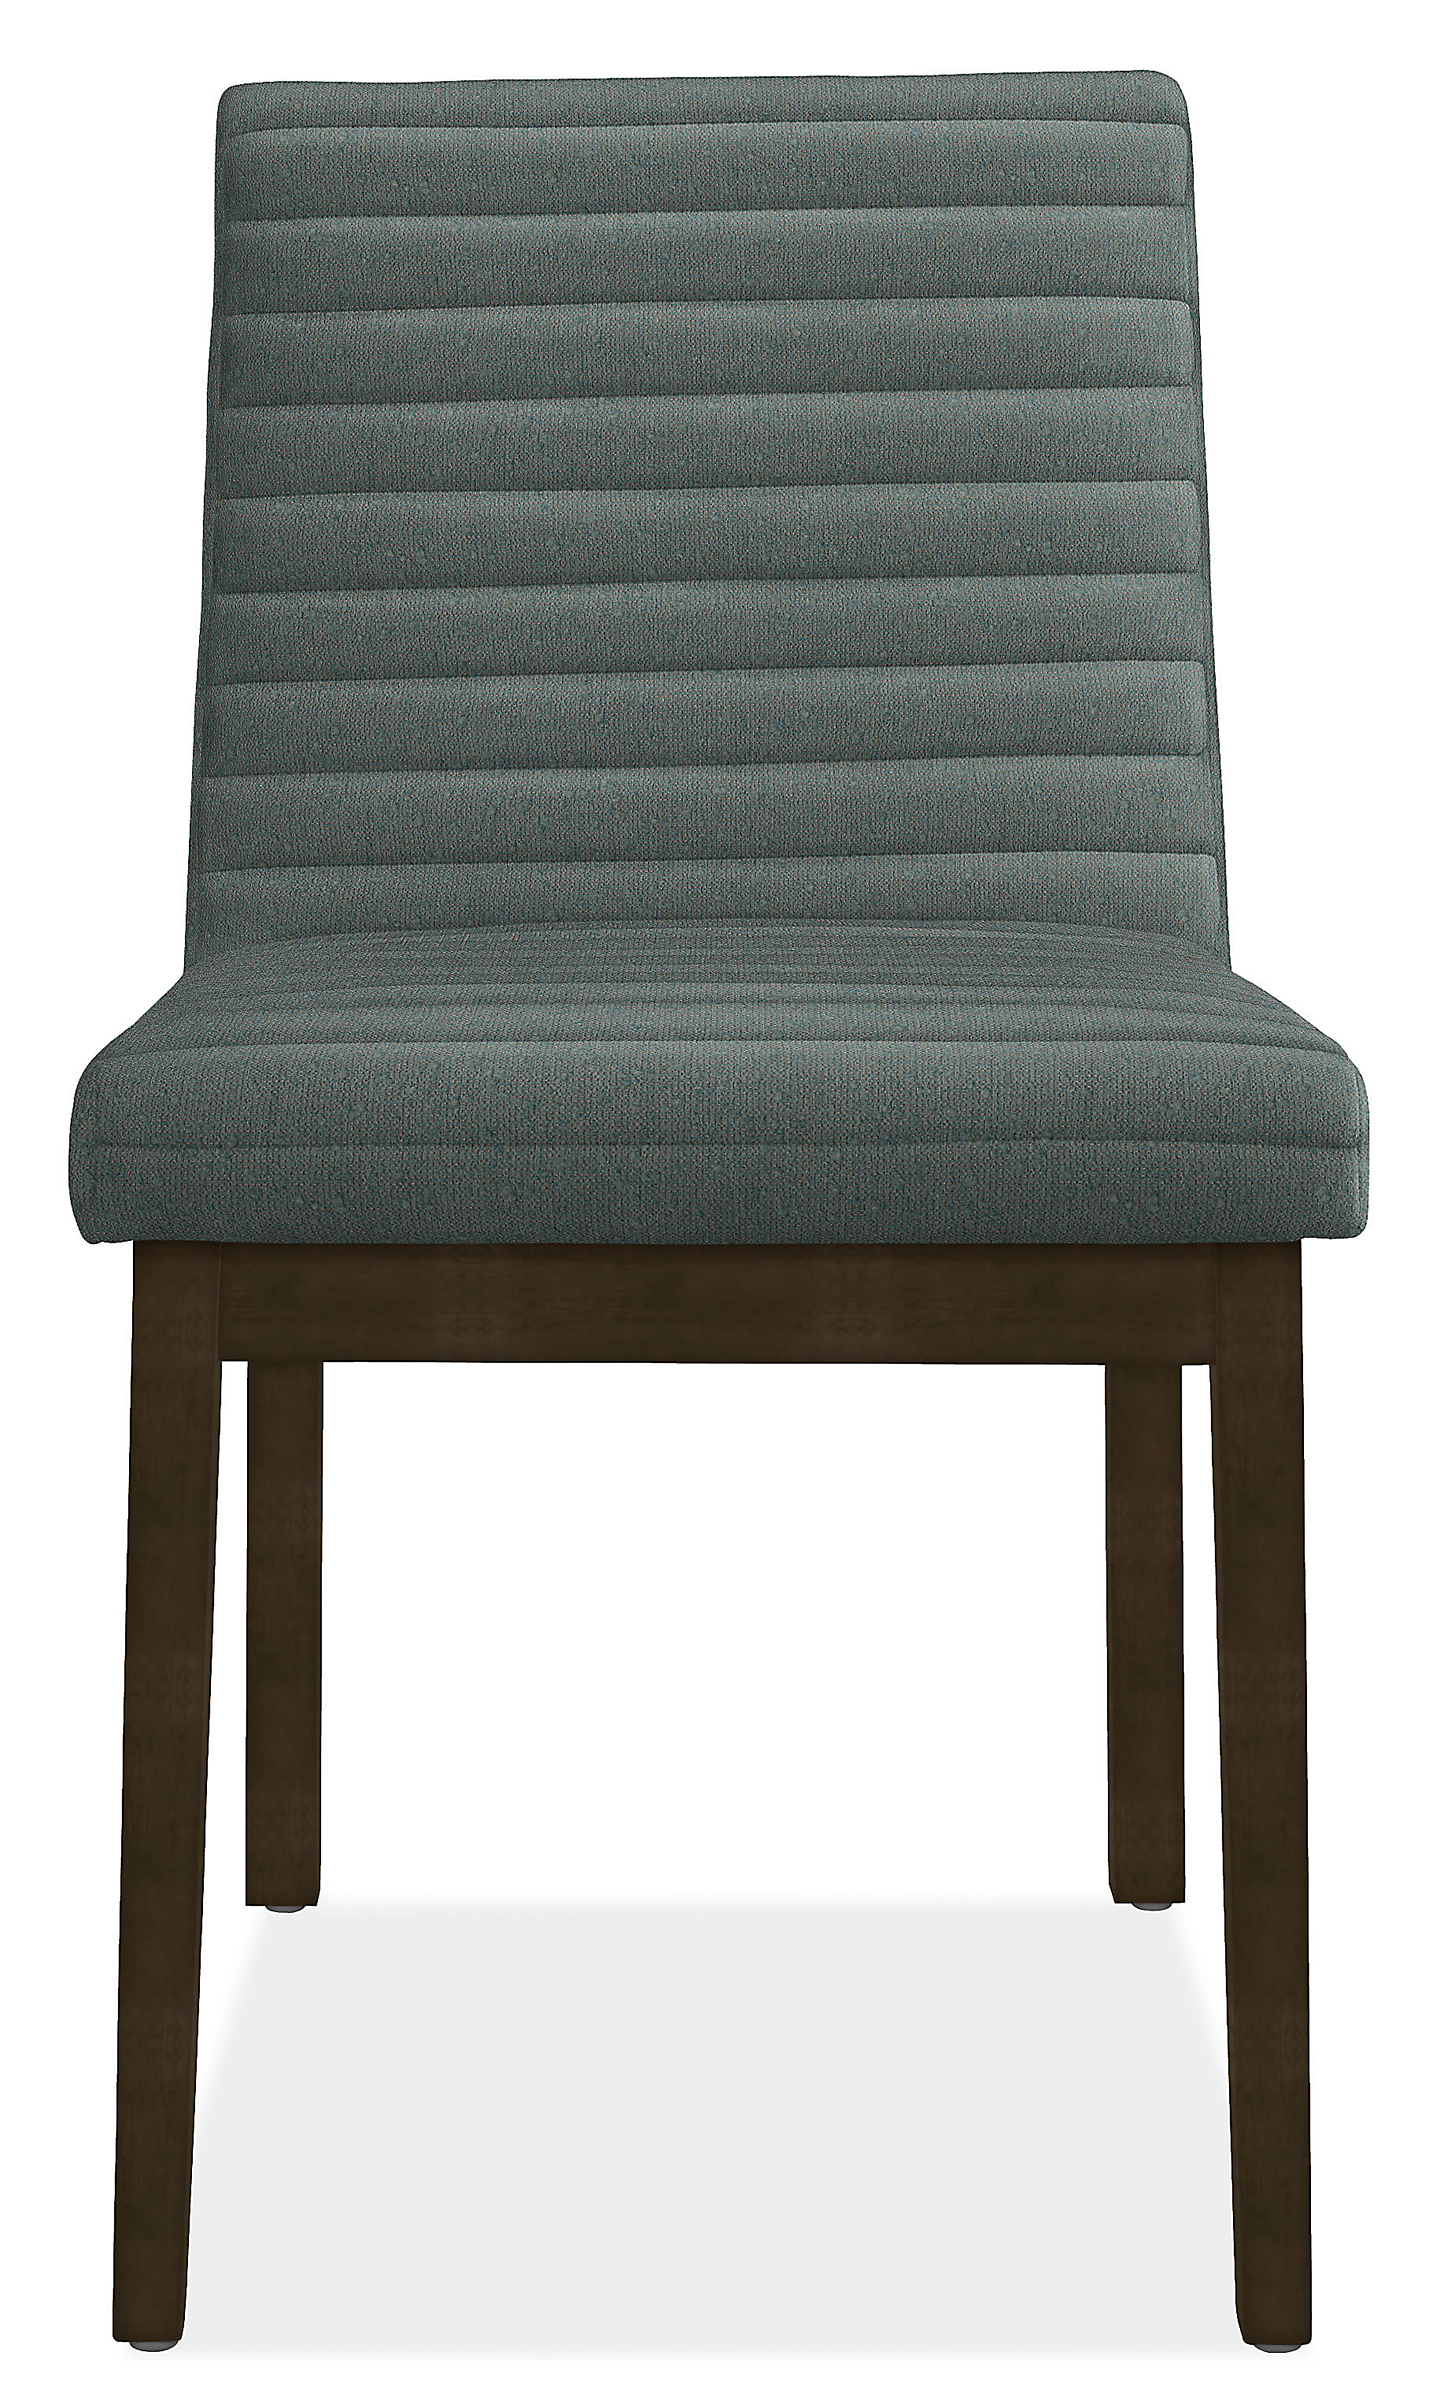 Front view of Olsen Side Chair in Declan Fabric.